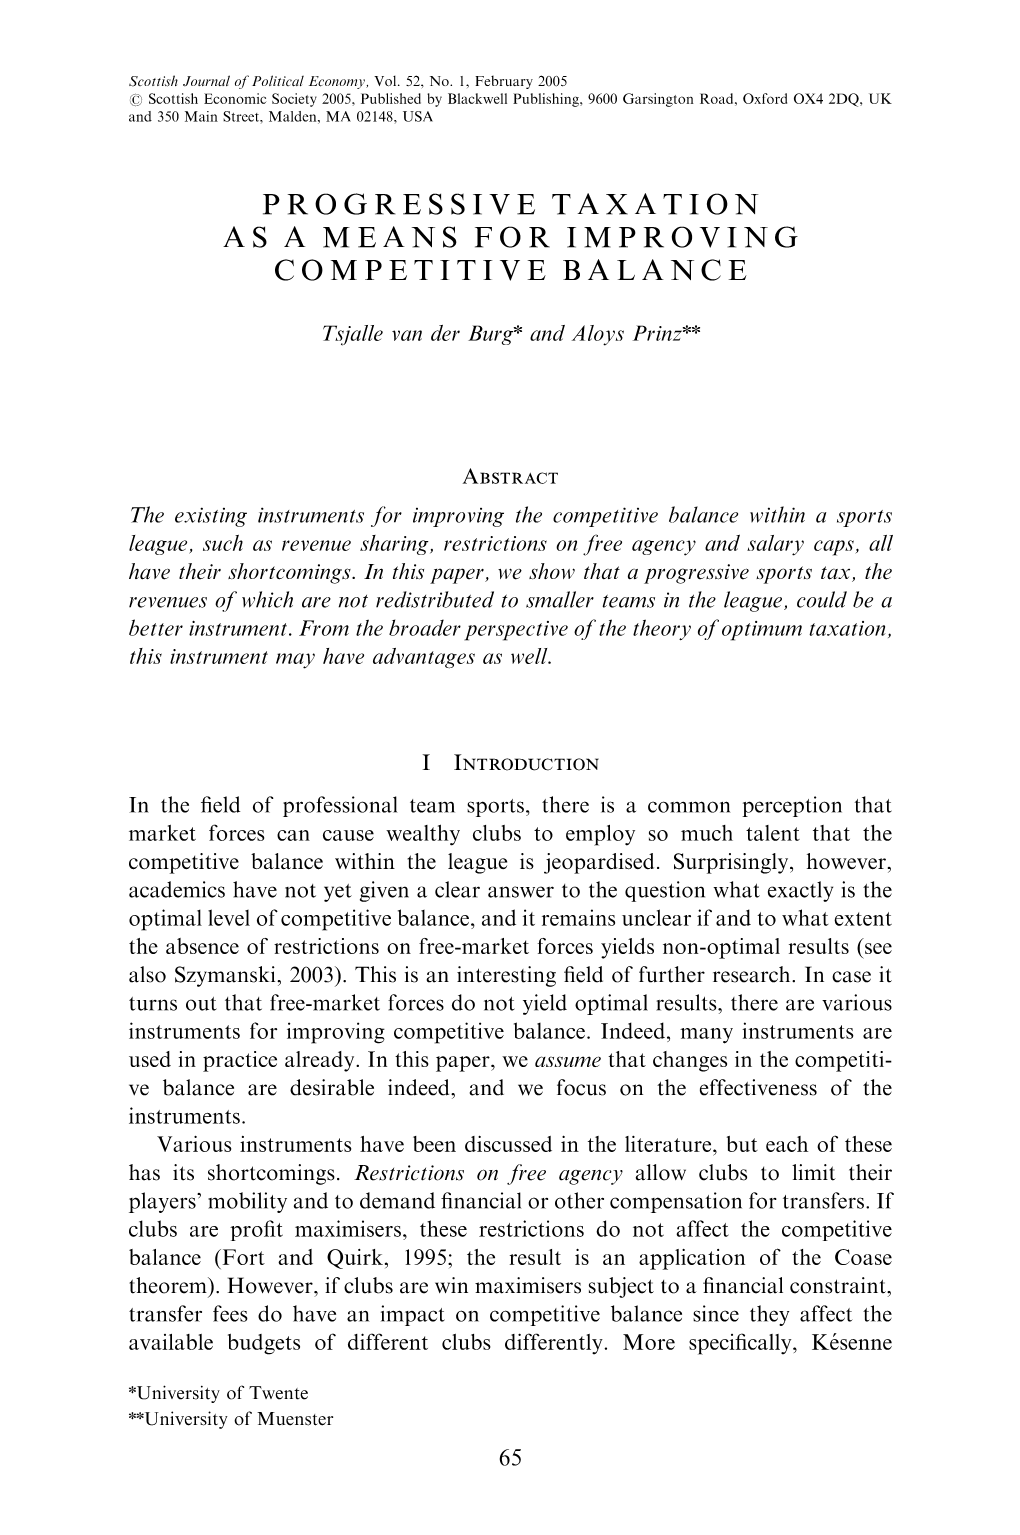 Progressive Taxation As a Means for Improving Competitive Balance